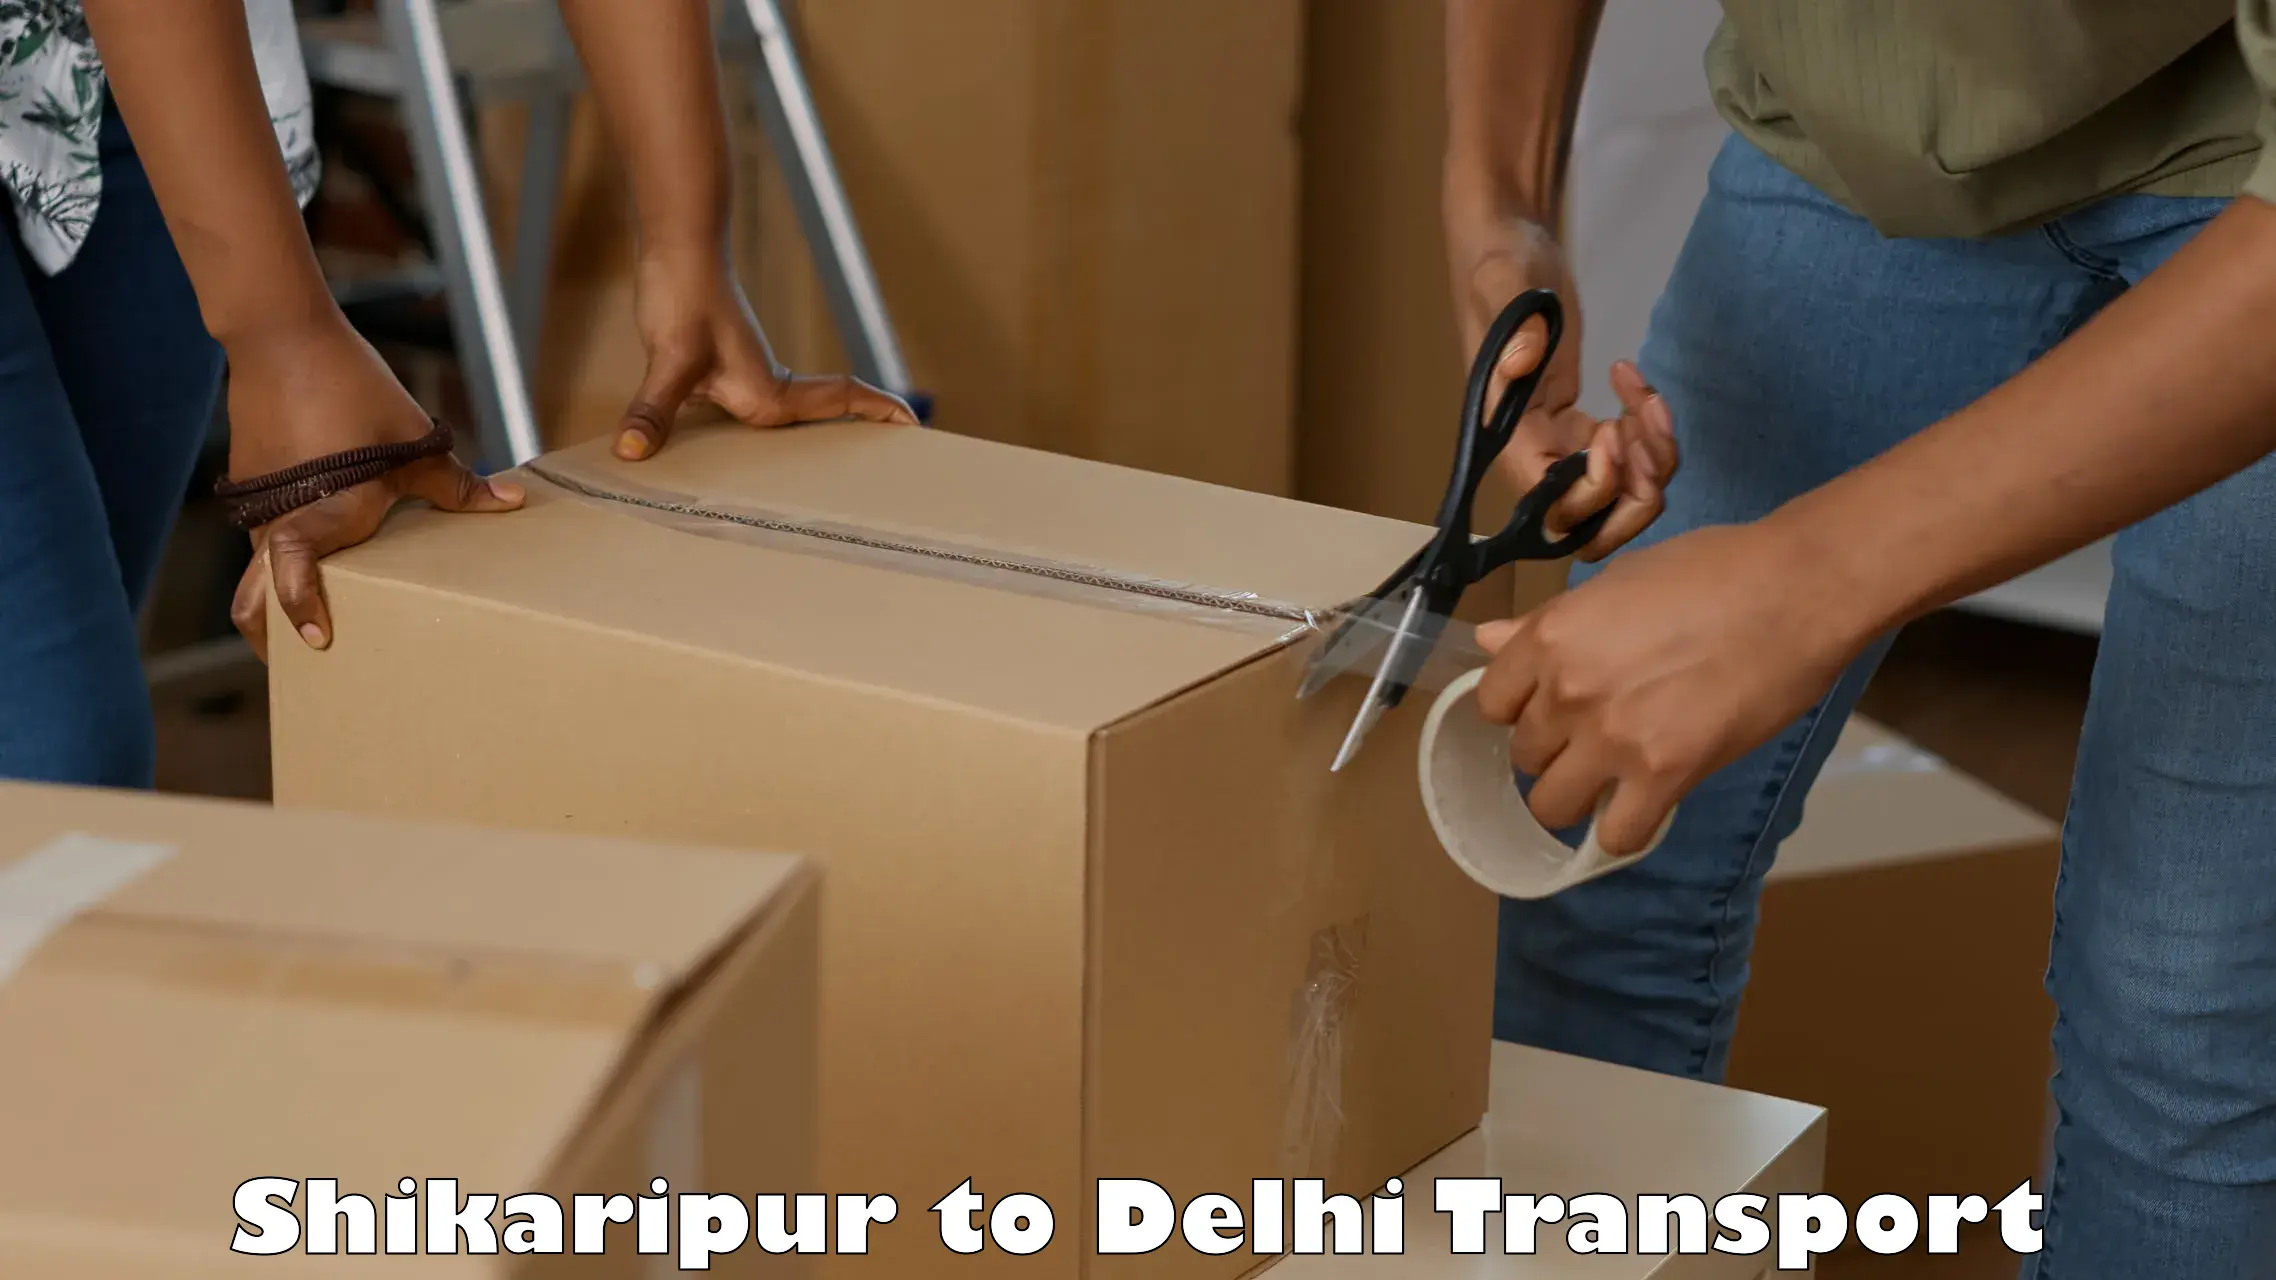 Delivery service Shikaripur to IIT Delhi